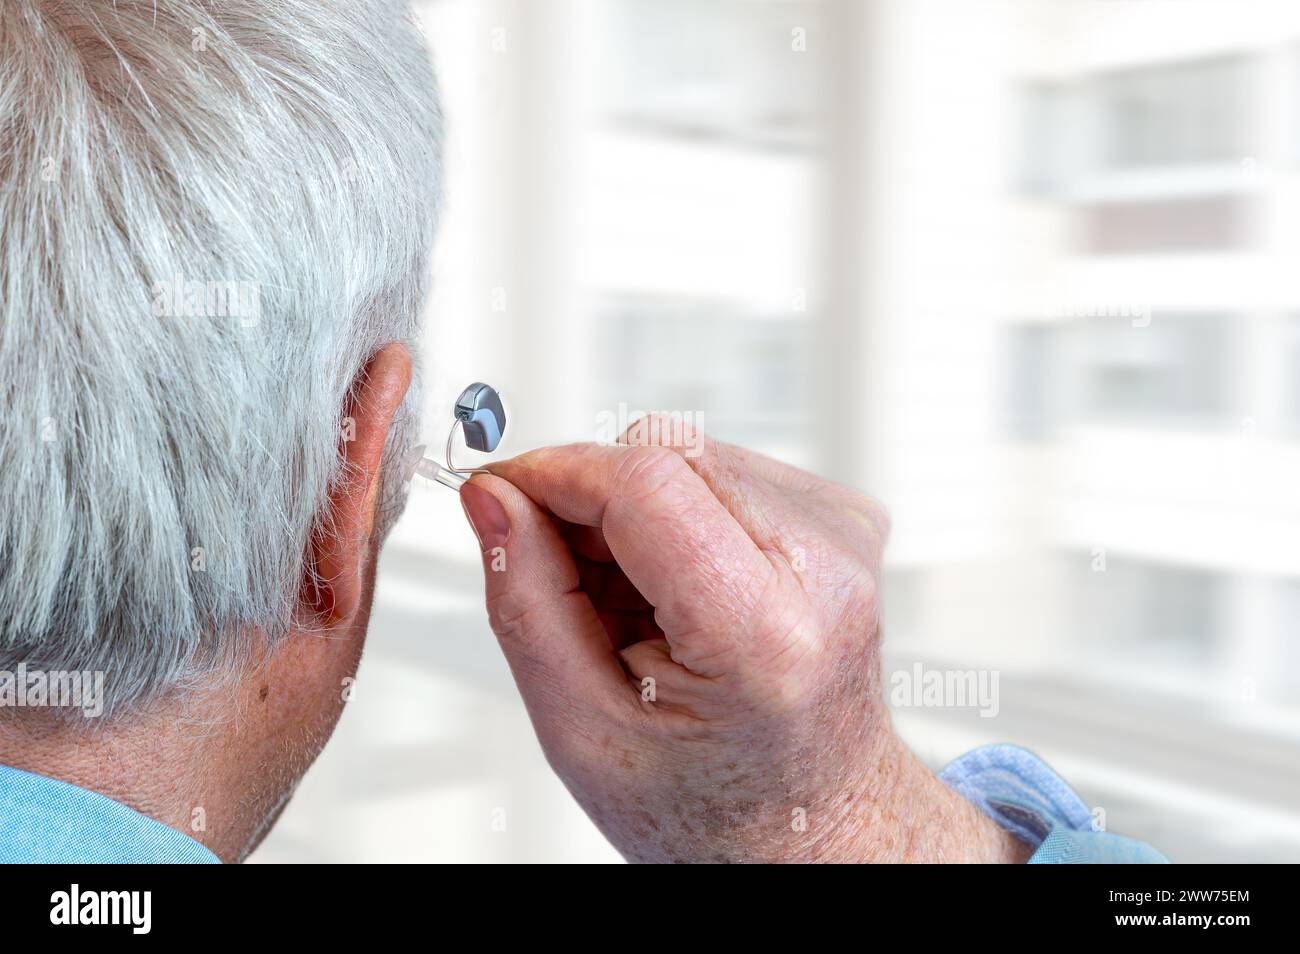 American shot of fitting a hearing aid to a white-haired senior citizen, rear view. Stock Photo